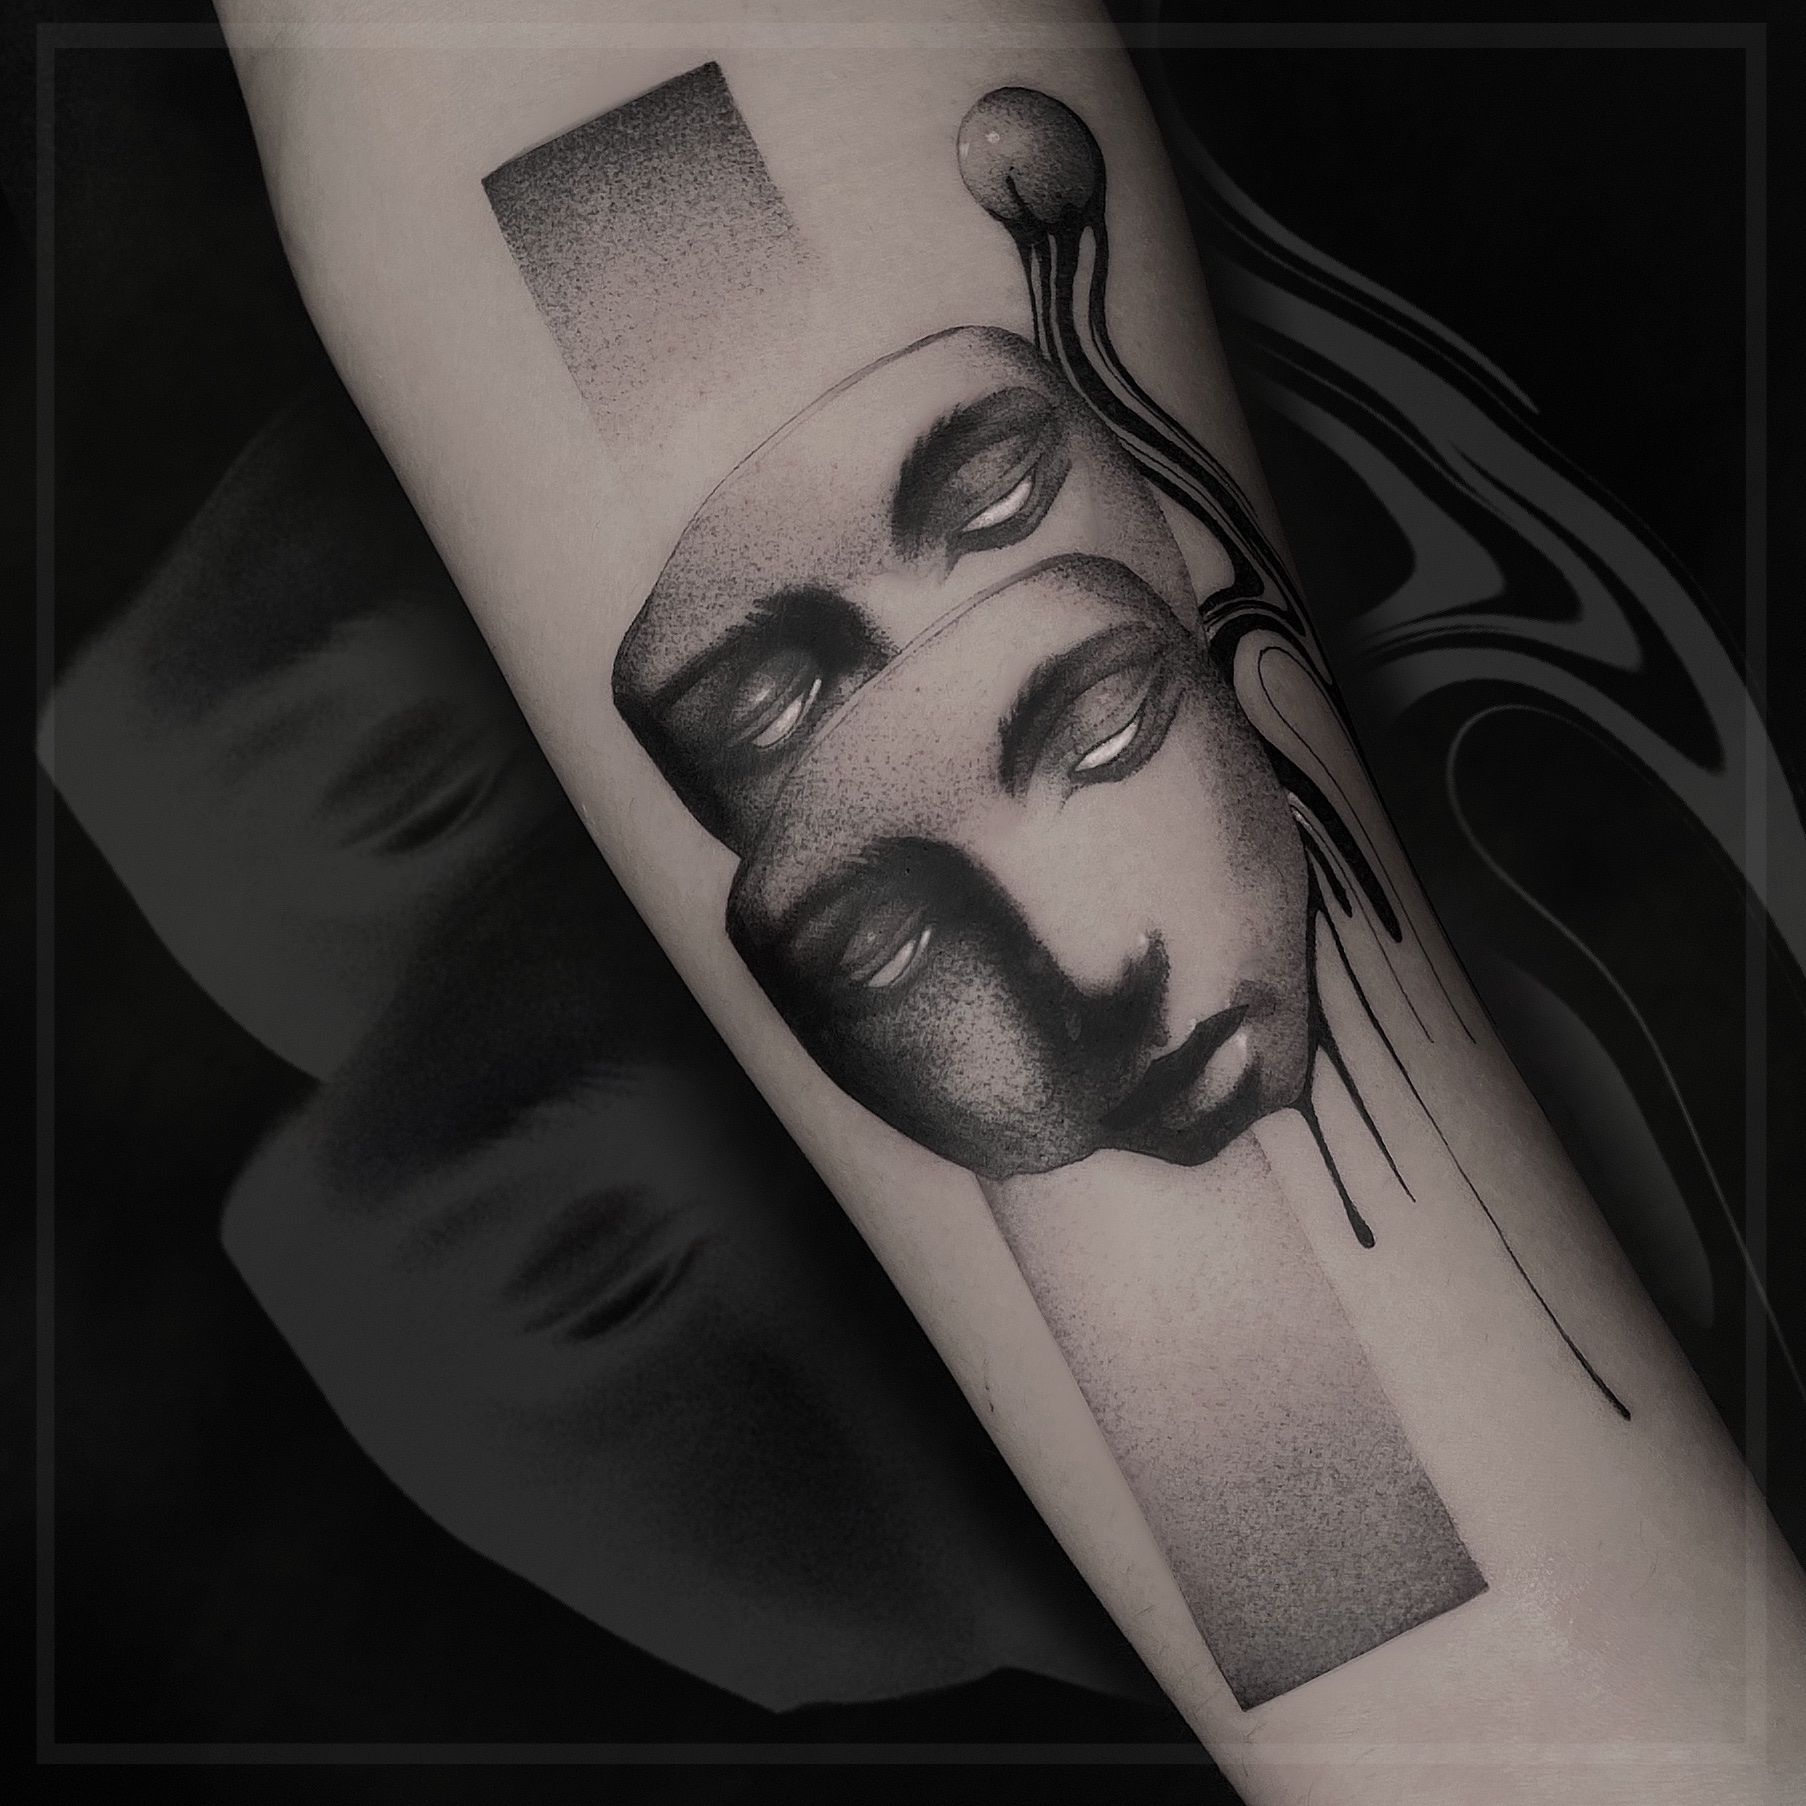 Future tattoo for Bipolar. Happy mask to represent mania, sad mask to  represent depression. I'm going to have a whole sleeve dedicated to mental  illness. : r/bipolar